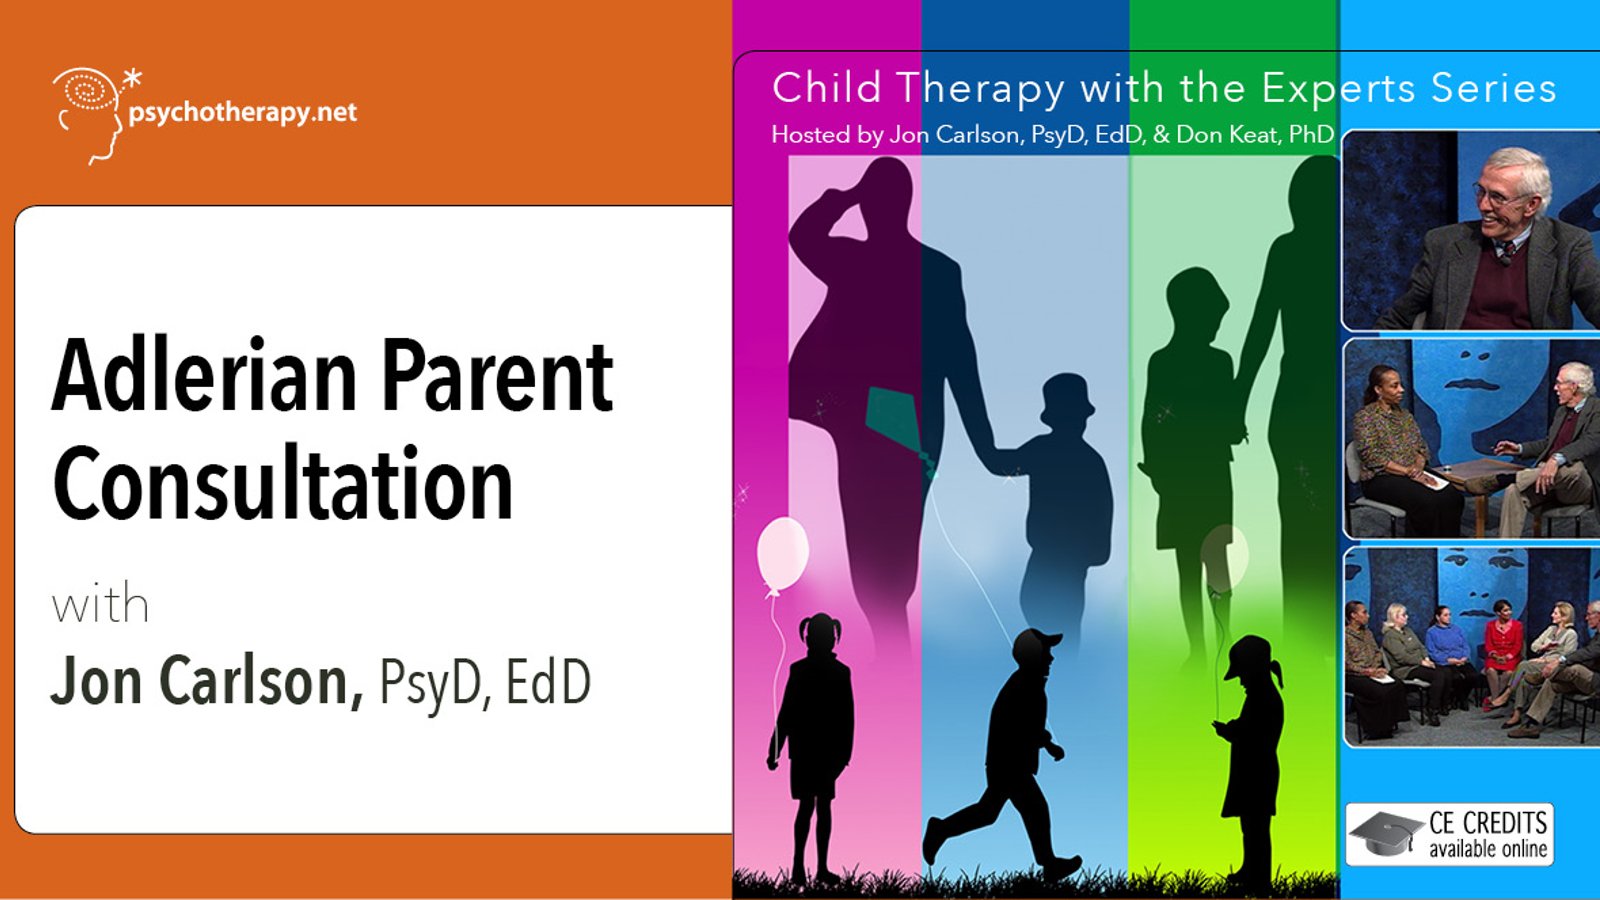 Child Therapy with the Experts Series